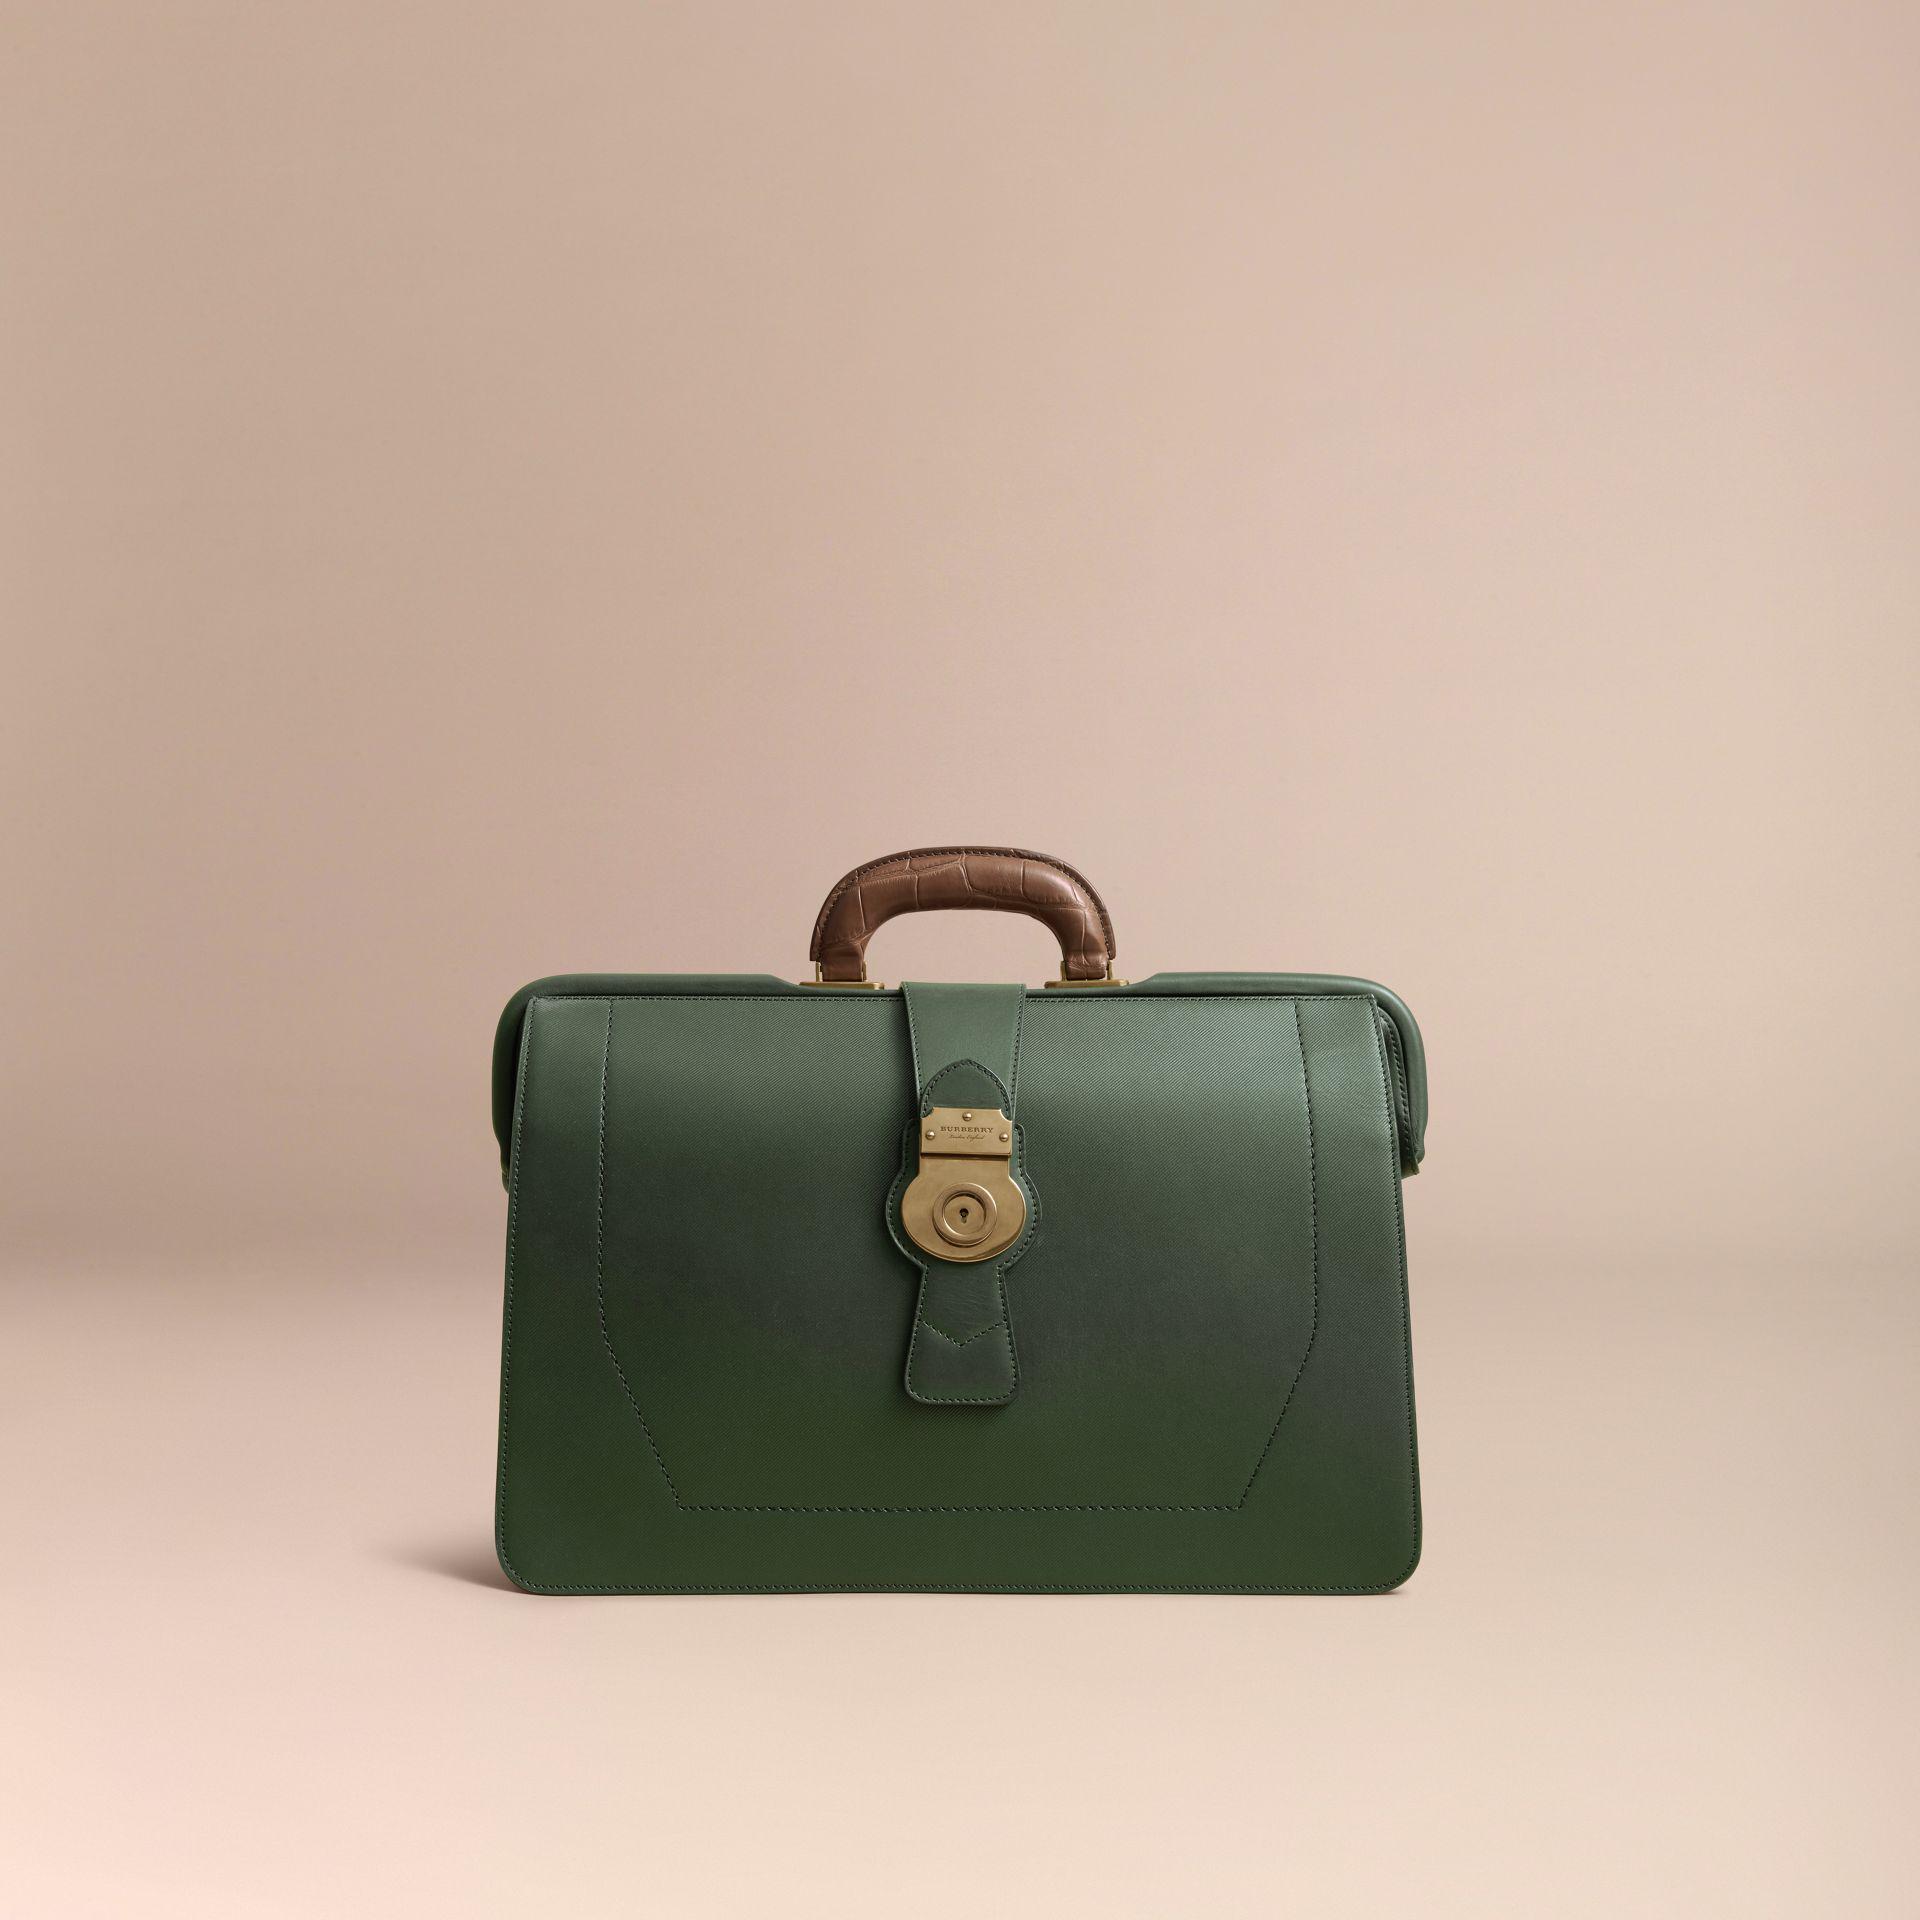 Burberry Leather The Dk88 Doctor's Bag With Alligator in Dark Forest Green  (Green) for Men - Lyst